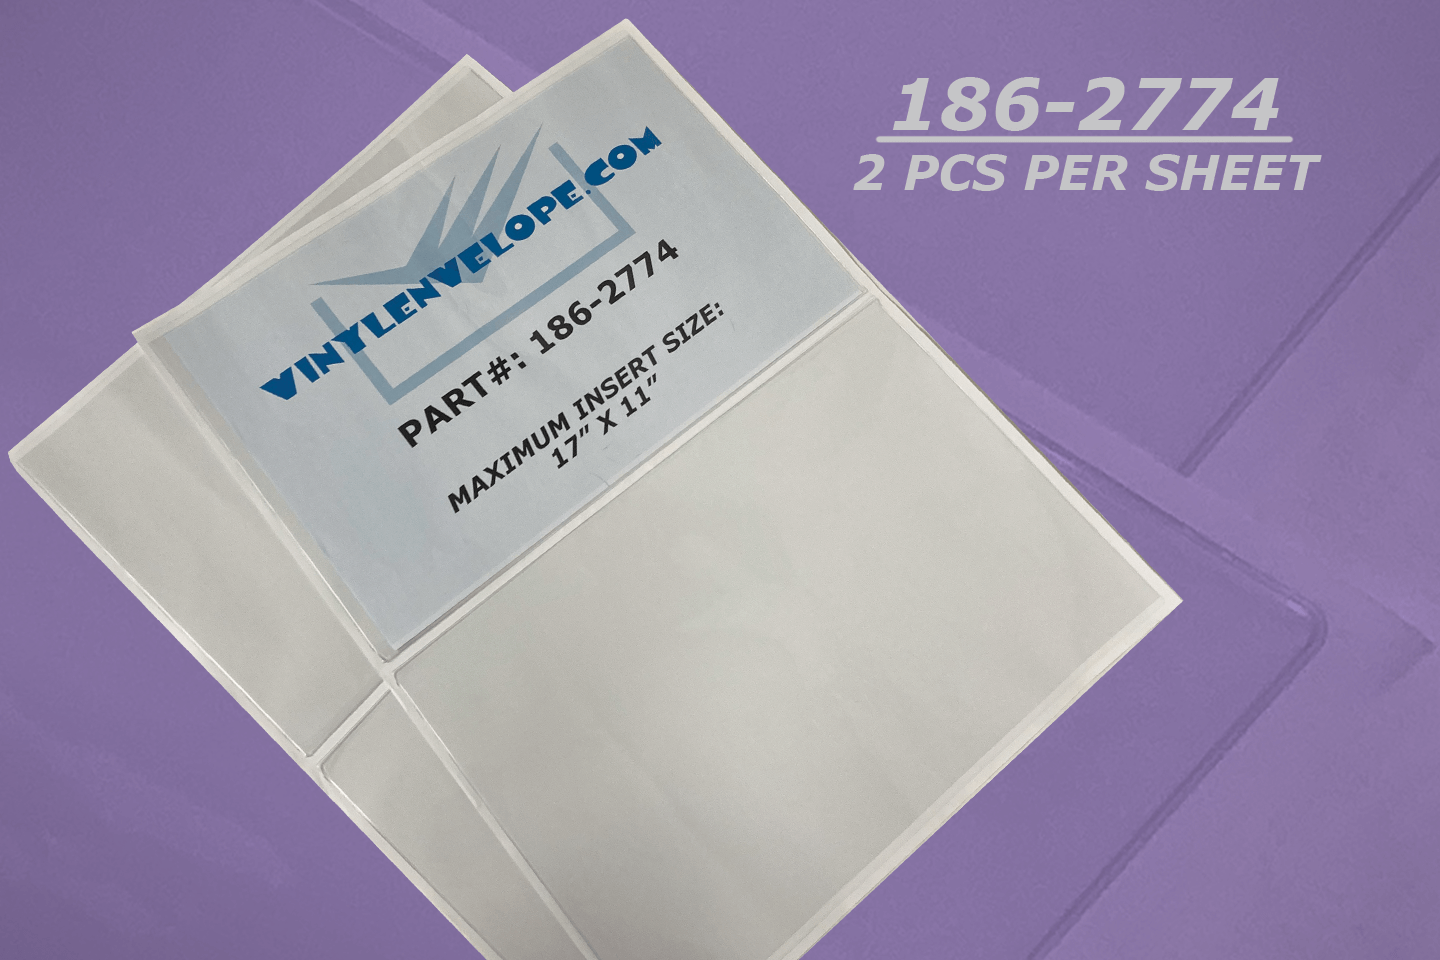 17" x 11" Adhesive Pouch